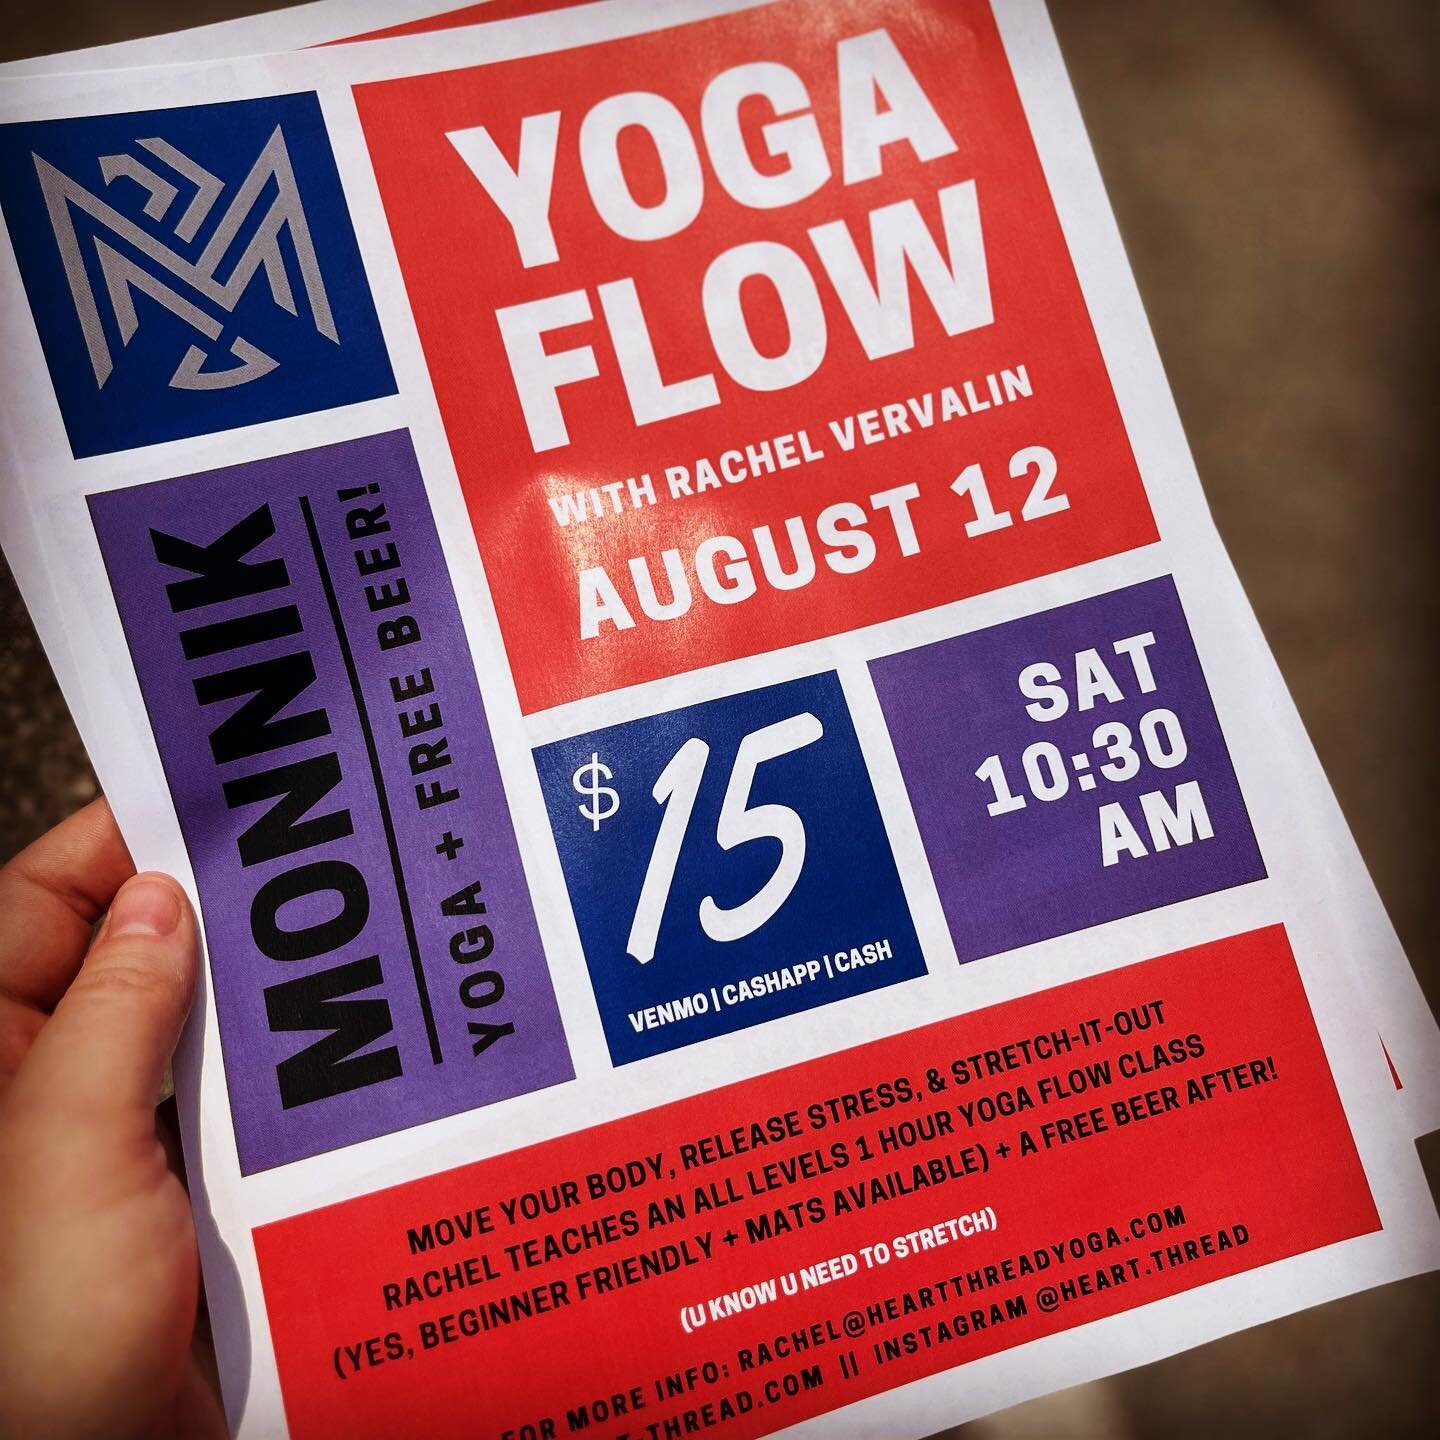 Change up! Going with the flow, riding the wave, yoga at @monniklouisville is moving from every Saturday to 1x/month. Mark your calendars for Saturday august 12 10:30am, and we&rsquo;ll see ya there 💖💫